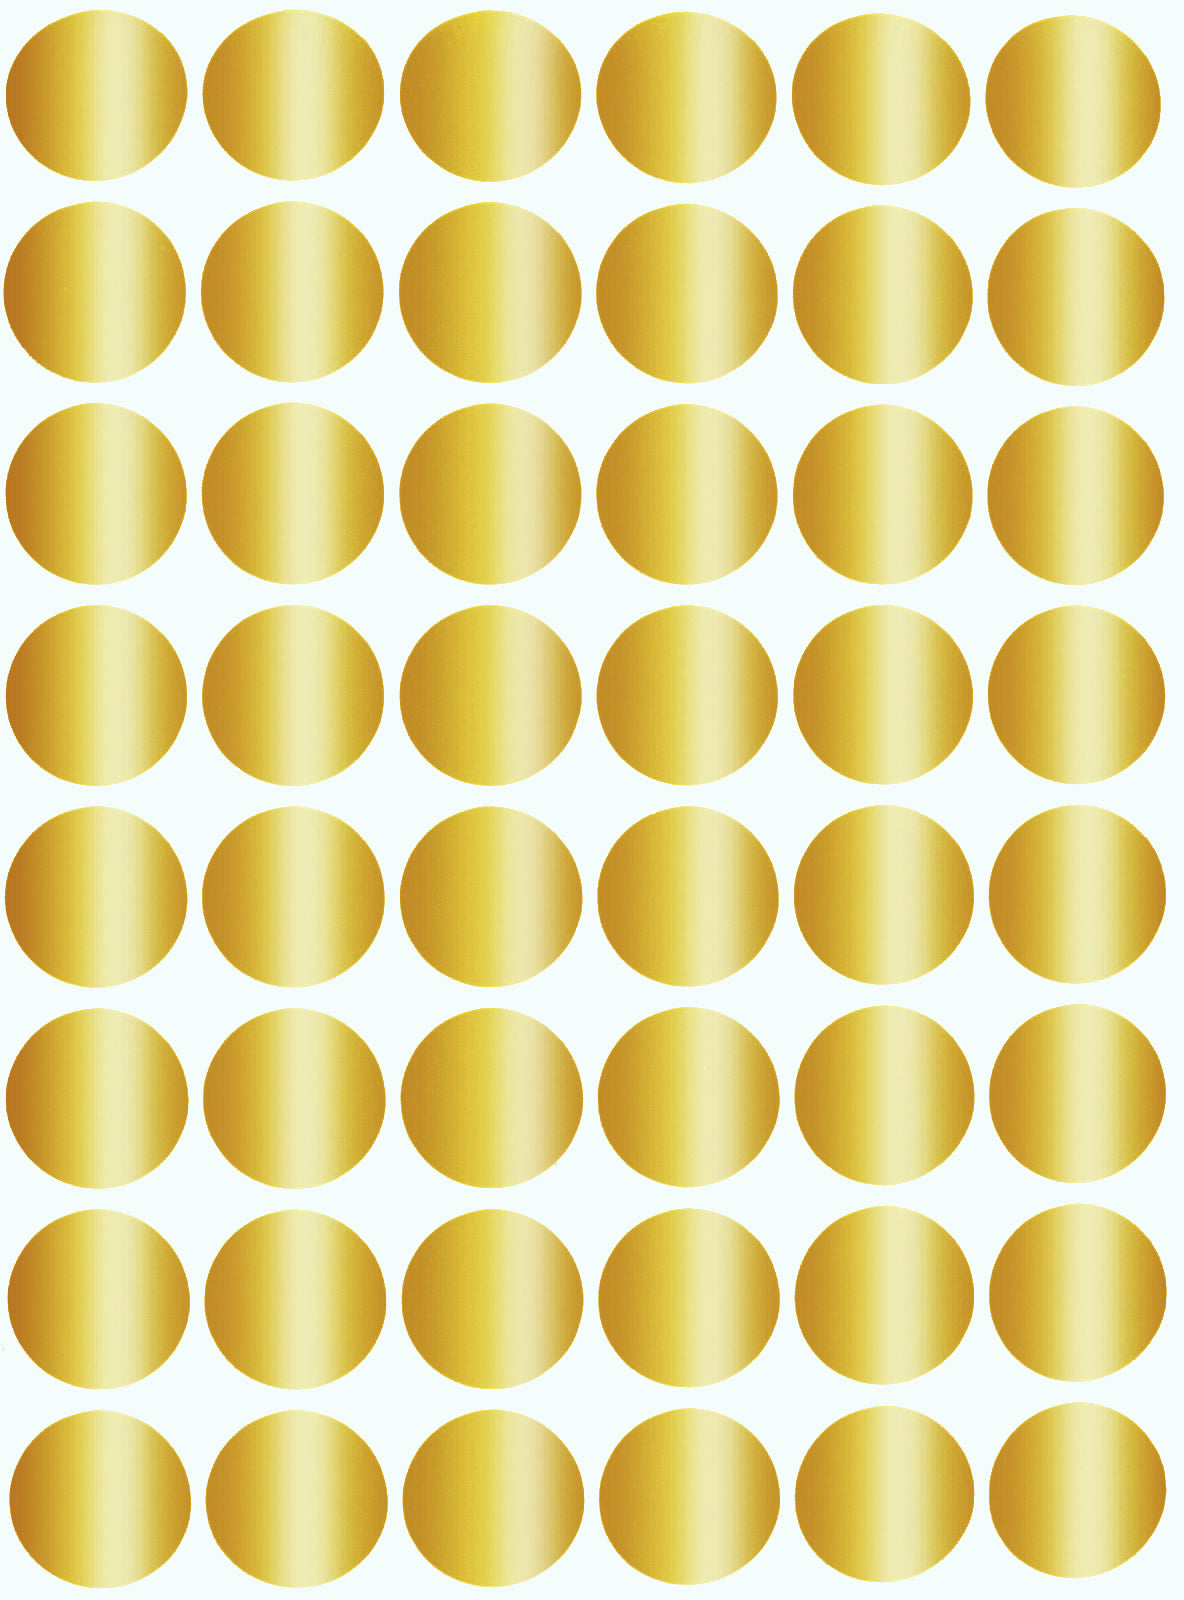 Round Stickers Approximately ~ 3/4 17 mm, Gold Dot Sticker 0.69 inch Label in 720 Pack by Royal Green